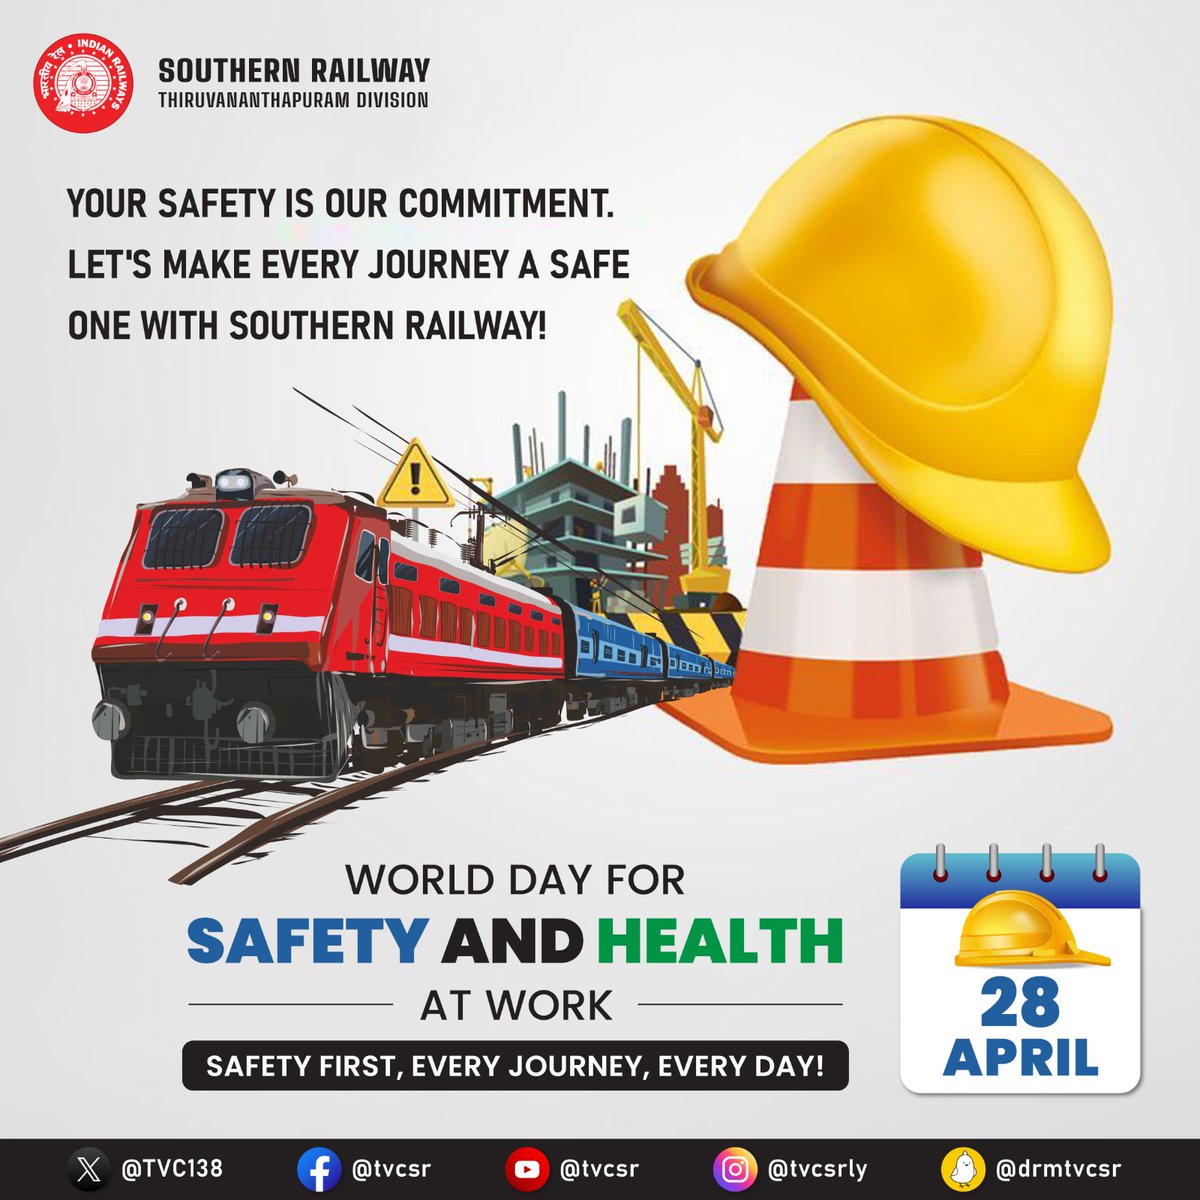 On #WorldDayforSafetyandHealthatWork, let's prioritize safety on train journeys. From thorough safety inspections to emergency preparedness, every step counts in ensuring a secure commute for all. 🚆 #TrainSafety #WorkplaceHealth